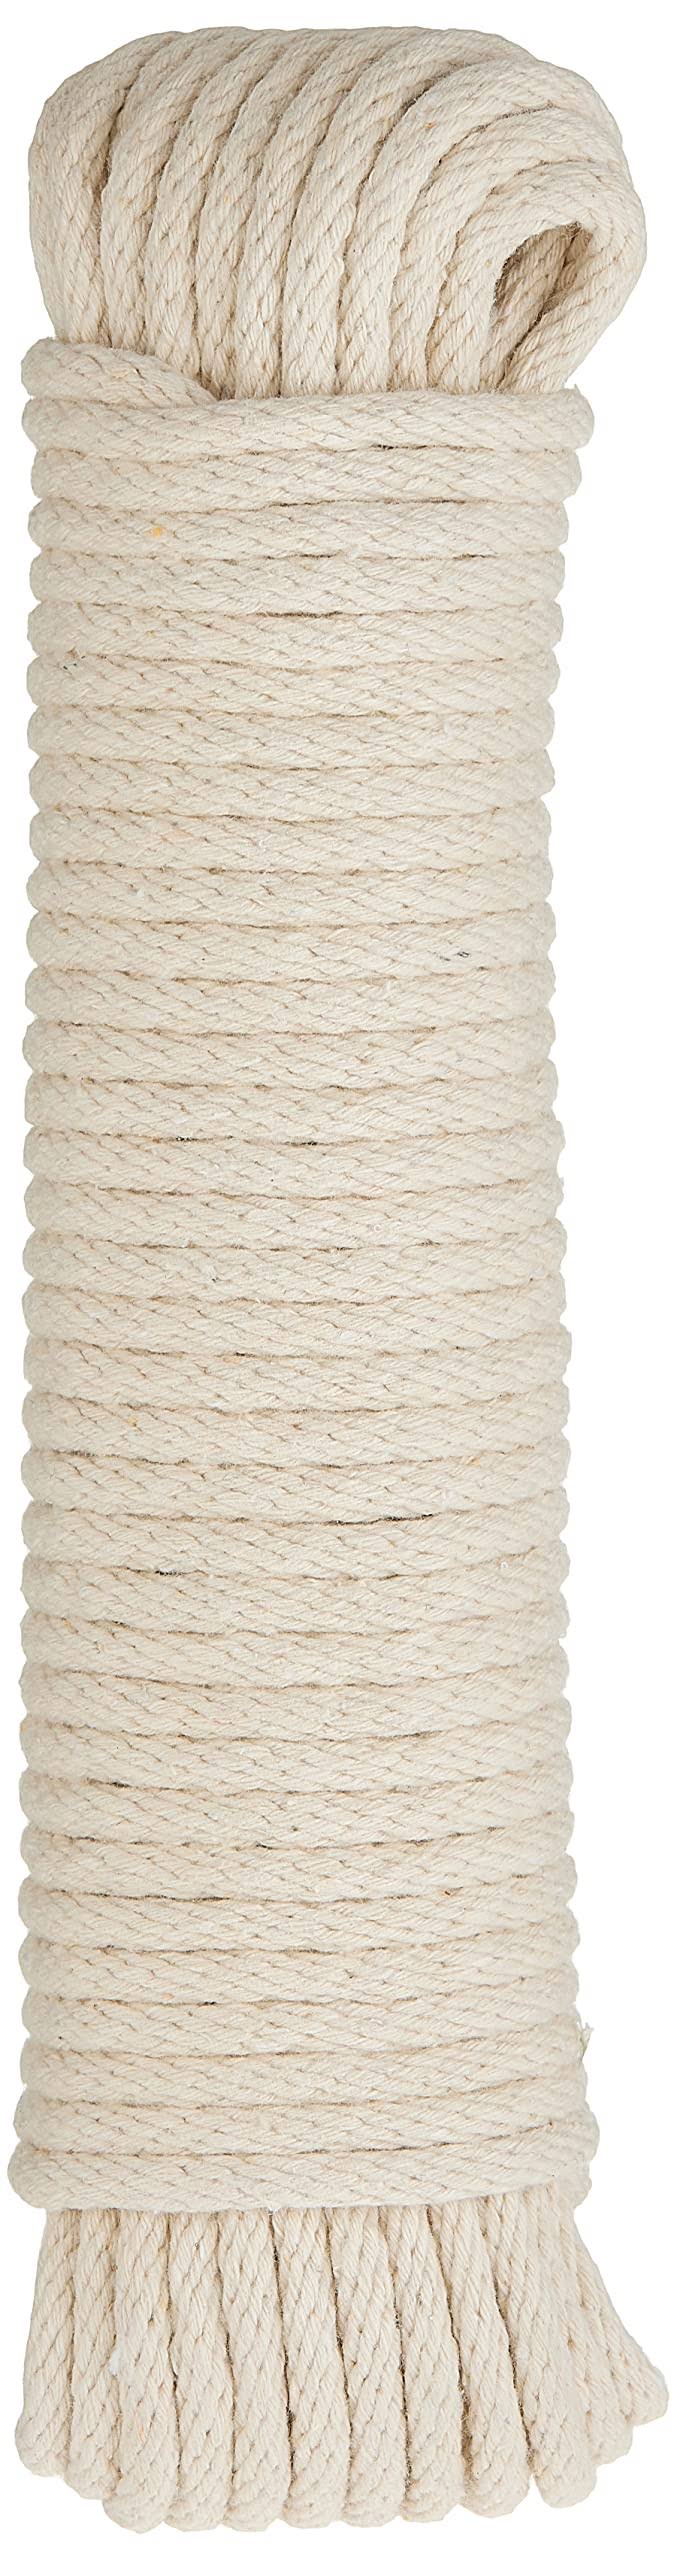 Sash Cord, Smooth, Braided Cotton, 1/4-In. x 50-Ft